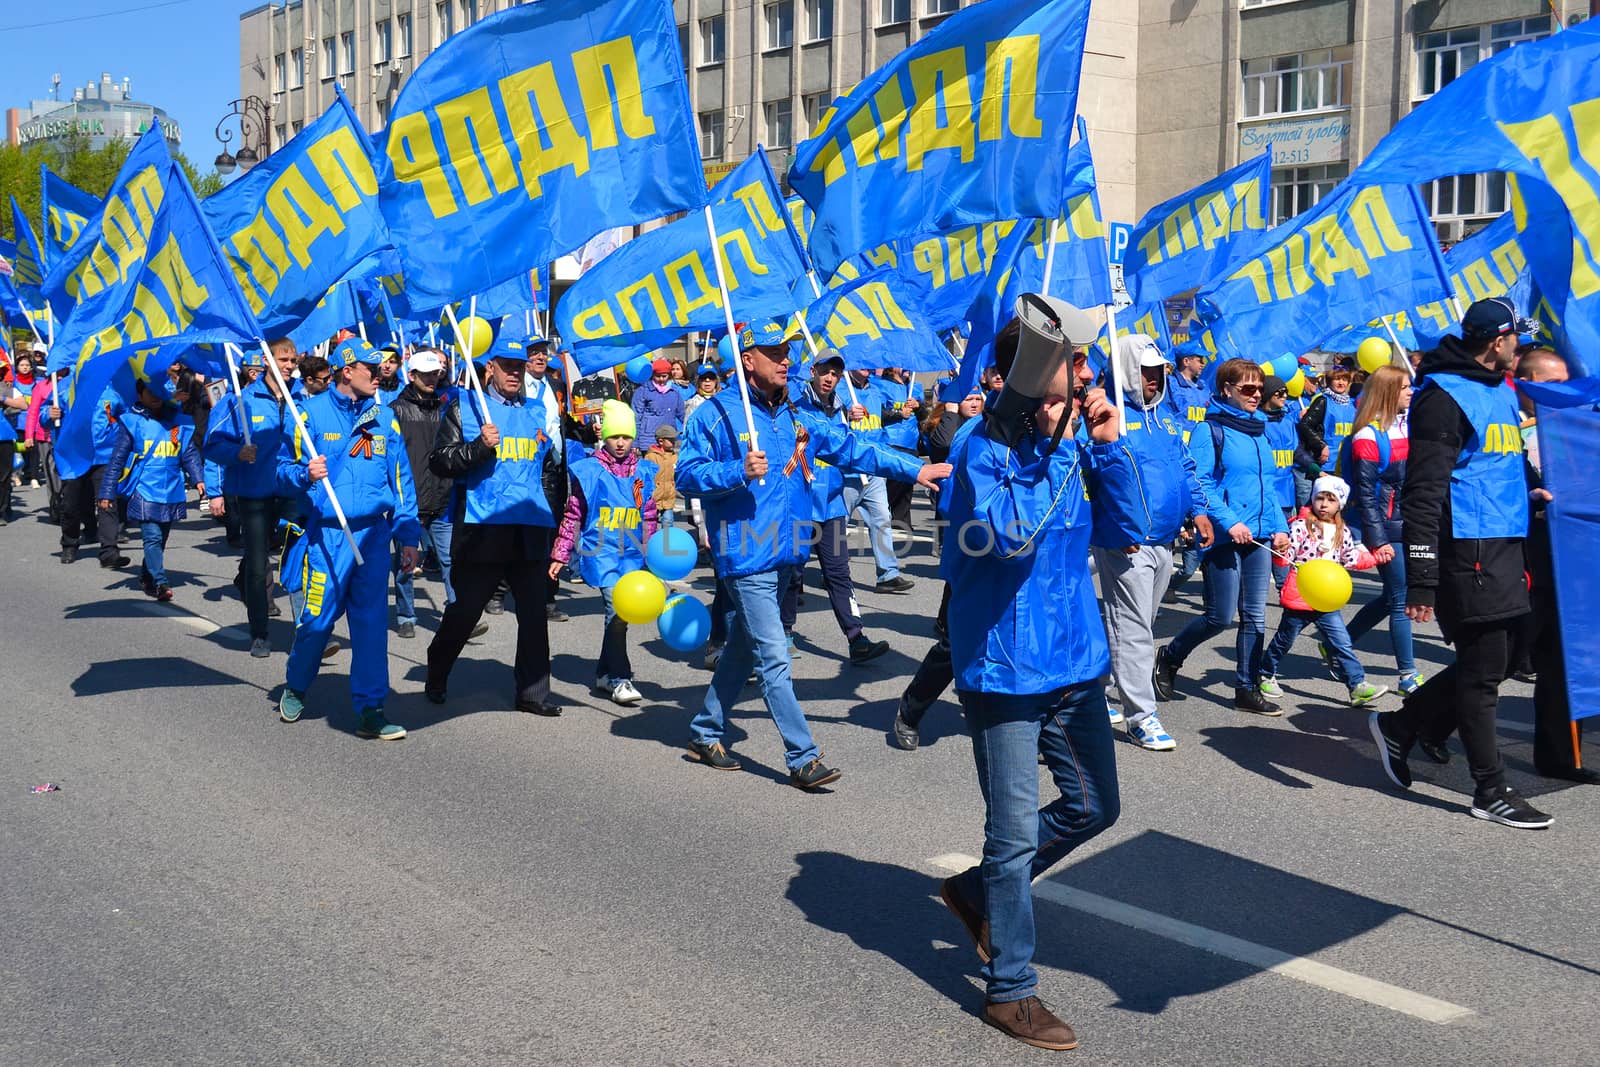 Parade on the Victory Day on May 9, 2016. Representatives of LDPR party. Tyumen, Russia